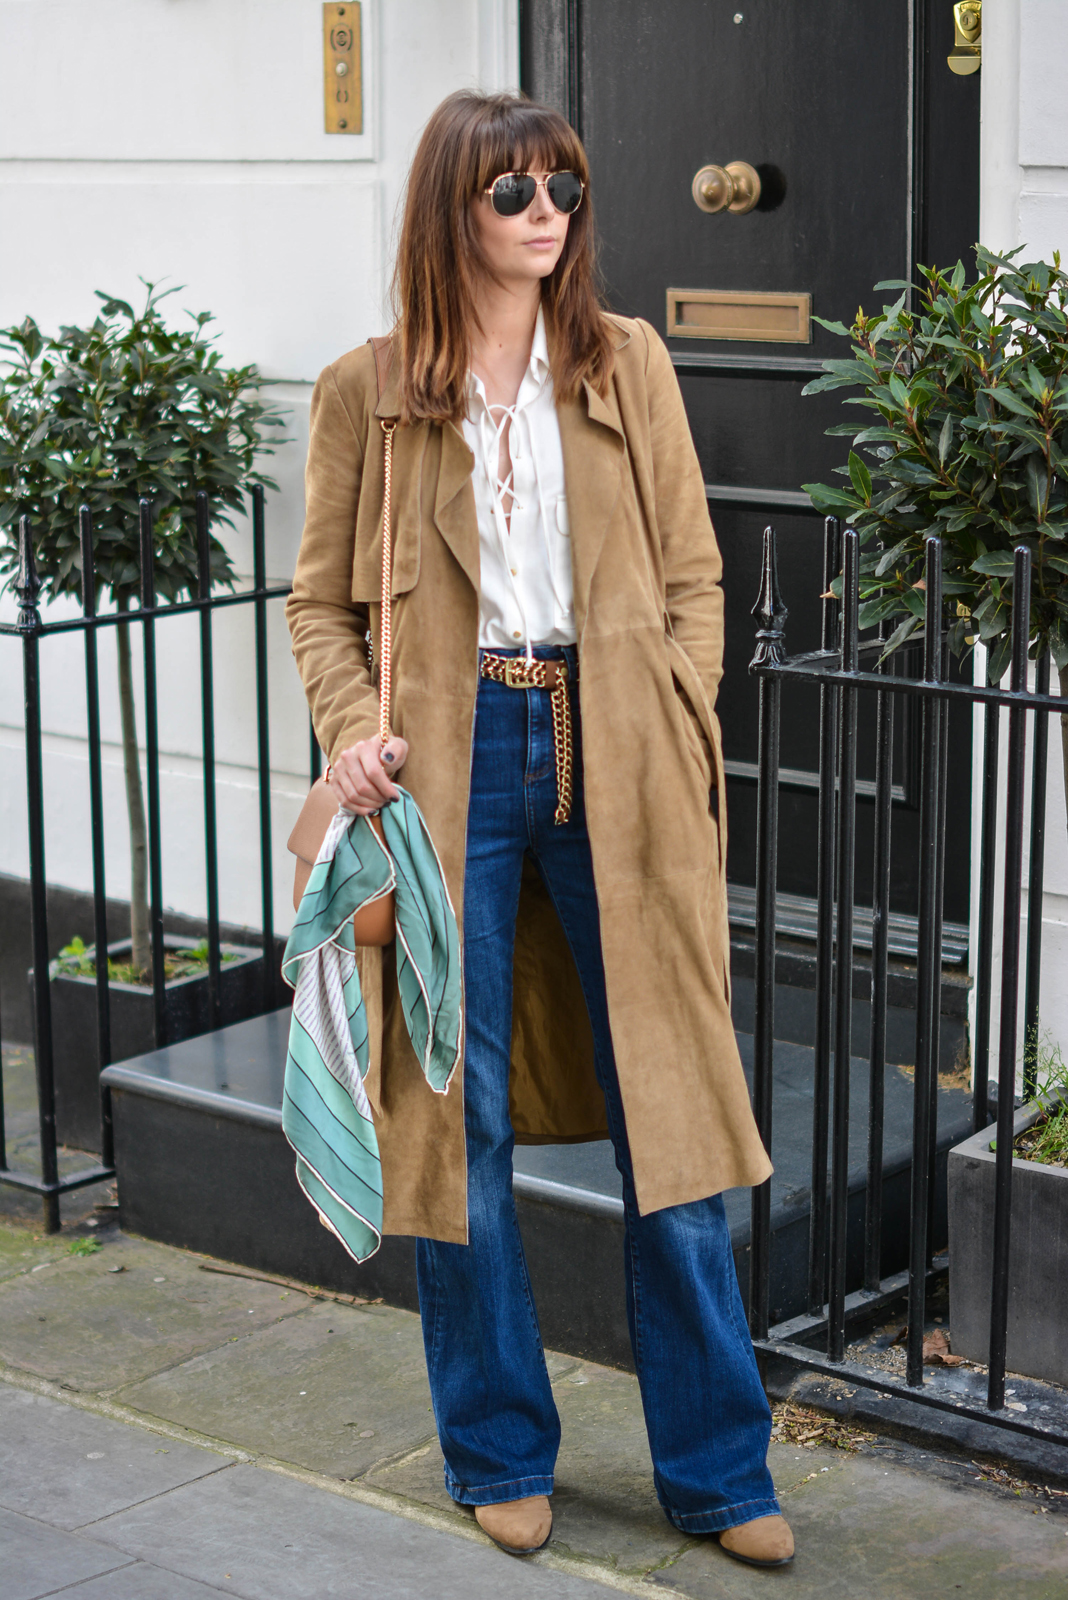 EJSTYLE - Suede trench coat by Gestuz, Zara lace up shirt, M&S High waisted flare jeans, tan chain belt, gold aviator sunglasses, Chloe drew dupe bag, Vintage valentino scarf, tan ankle boots, 70s street style